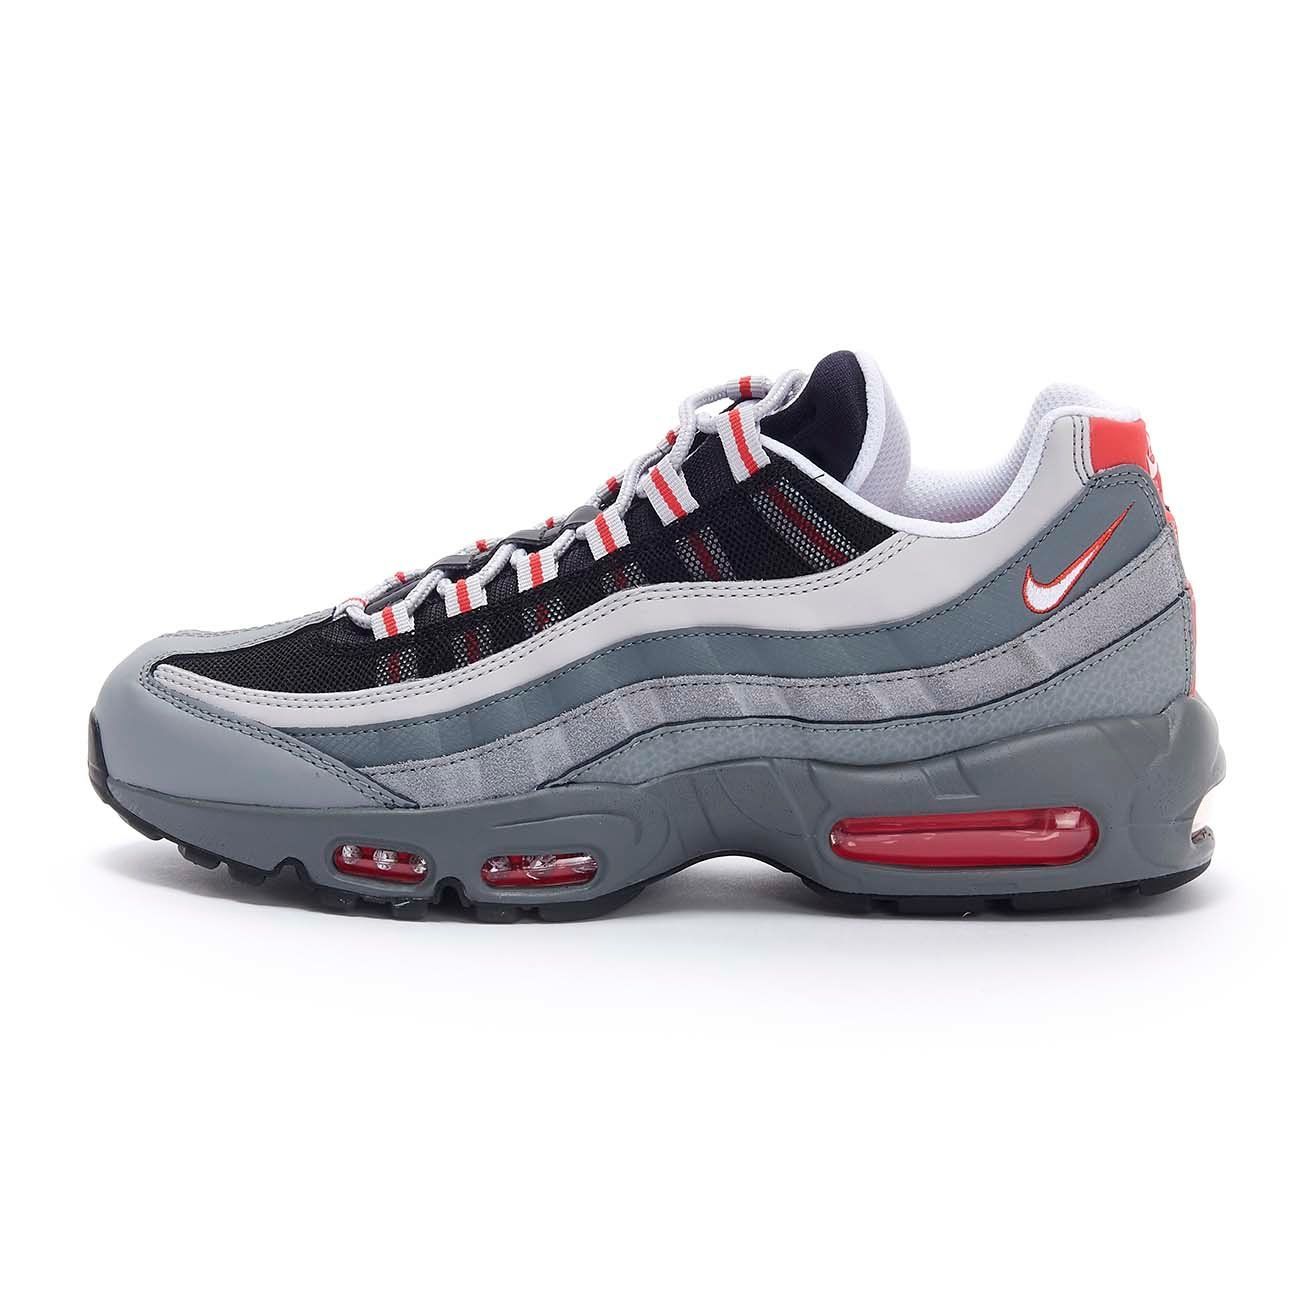 SNEAKER AIR MAX 95 ESSENTIAL Man Track red White Particle grey 2105826825863